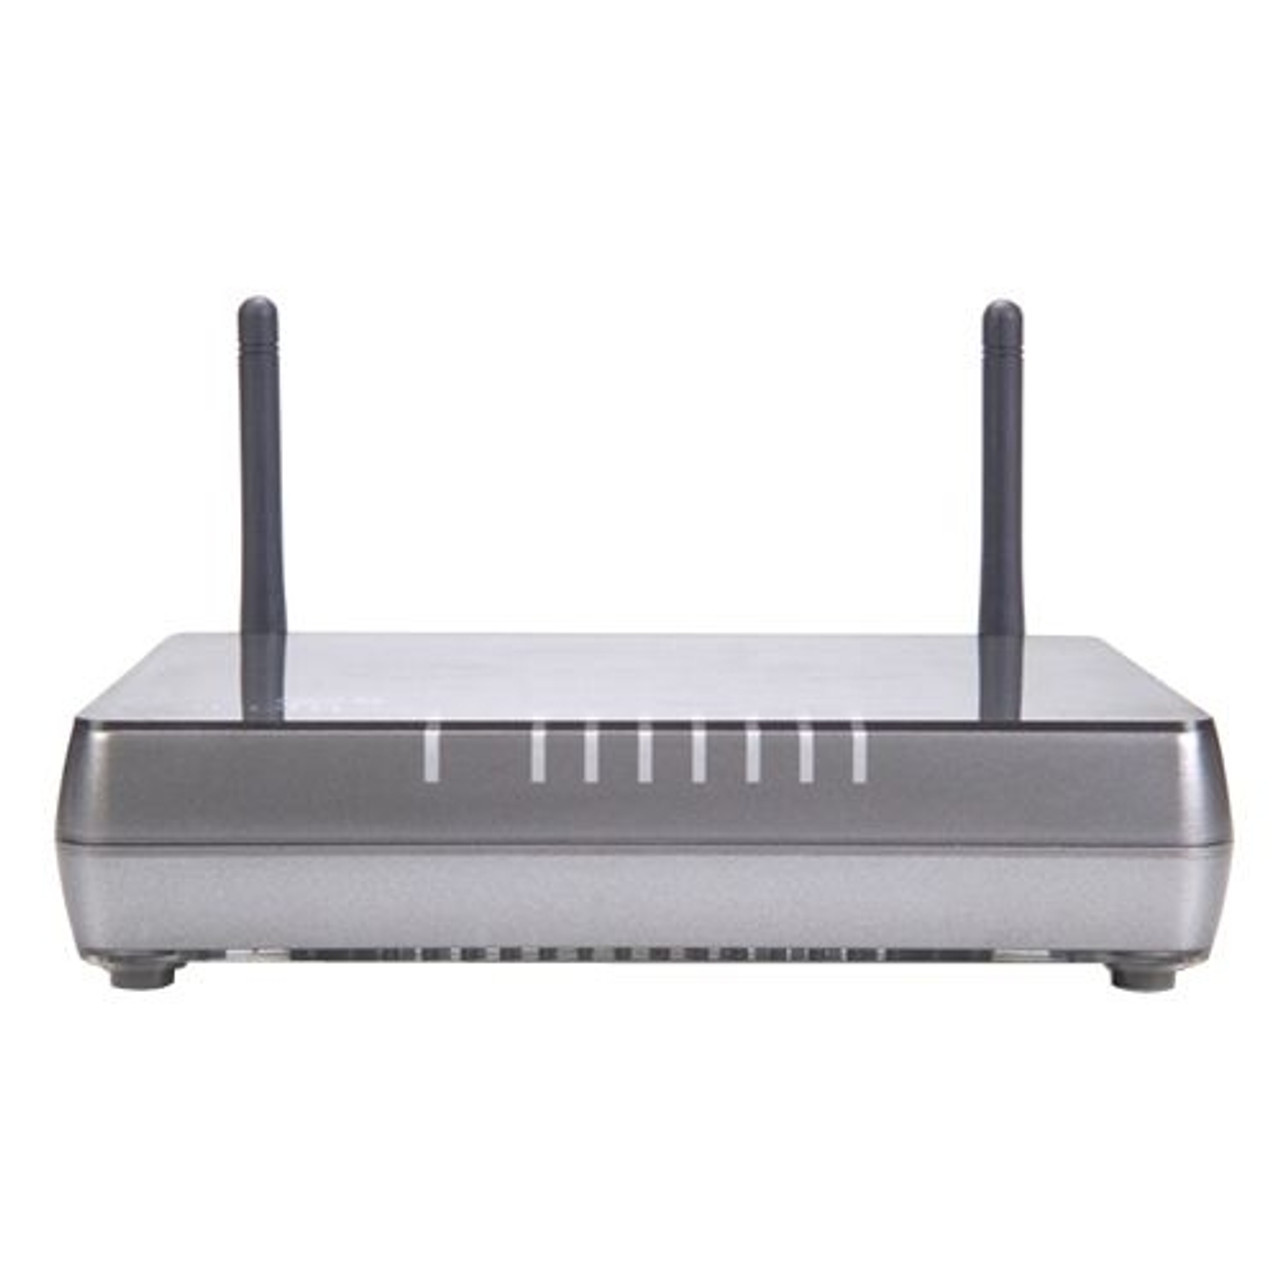 JE461A HP V110 IEEE 802.11n Modem/Wireless Router (Refurbished)